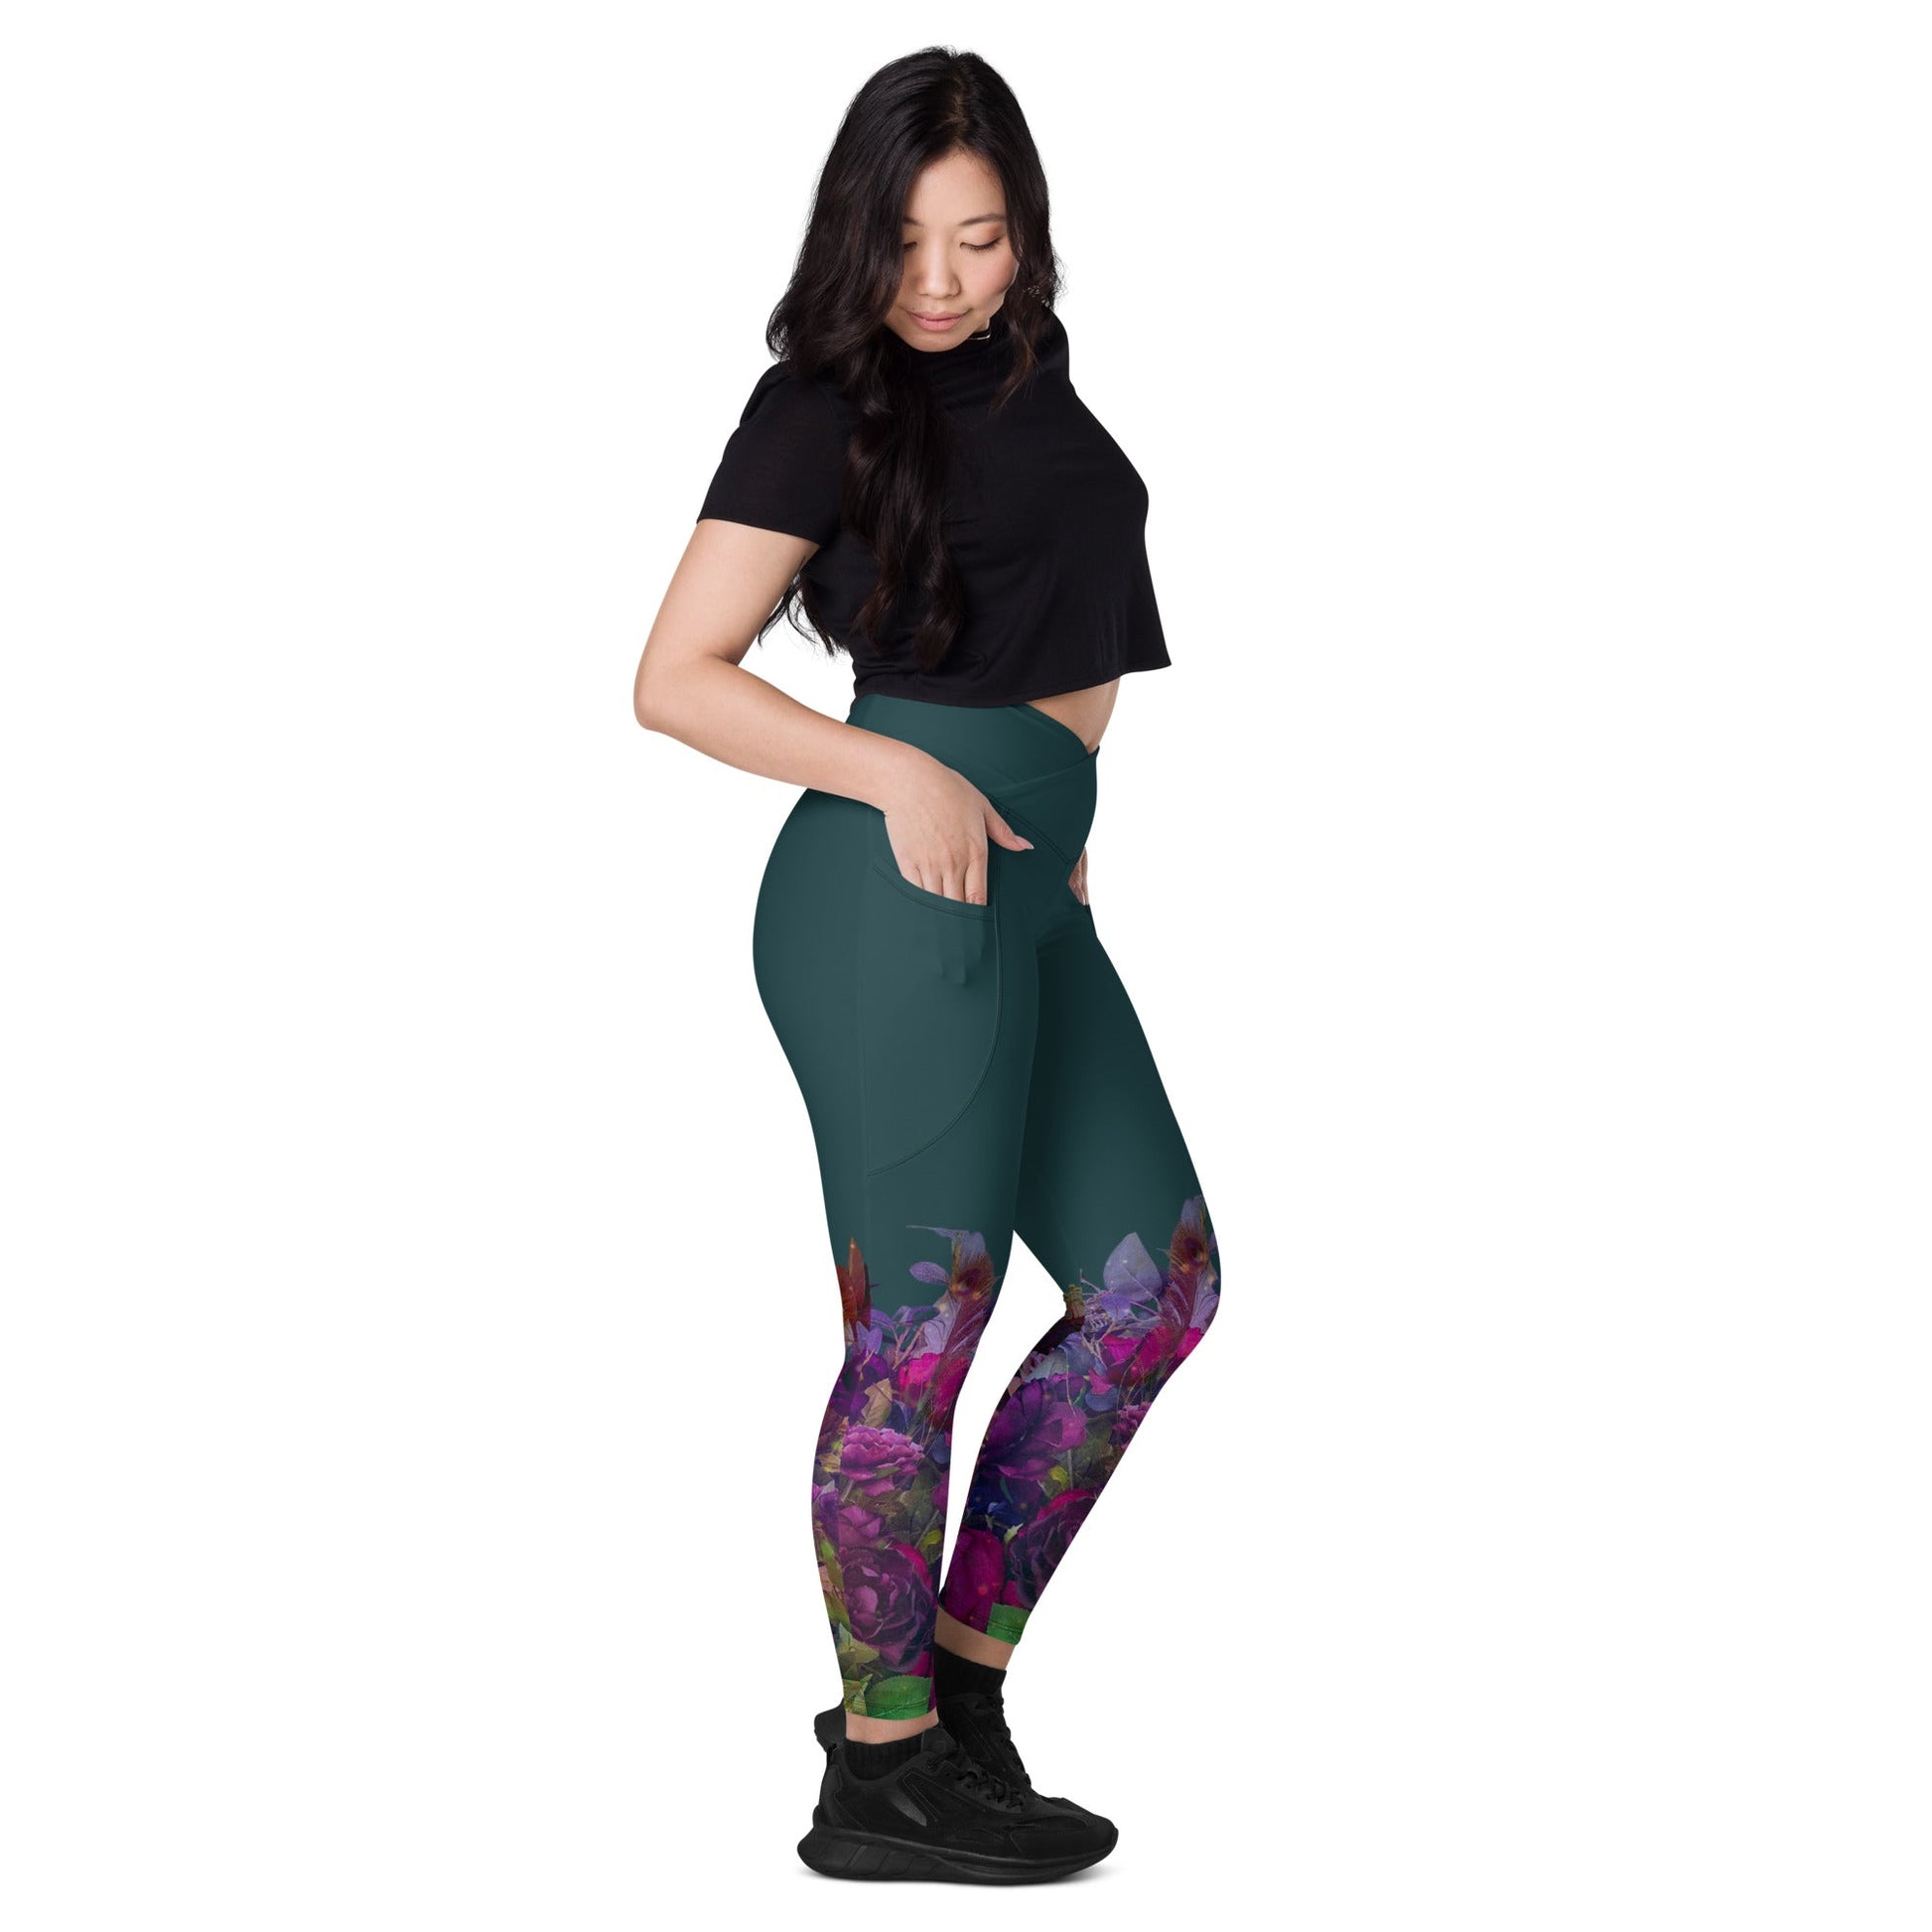 Teal Bouquet Crossover leggings with pockets - Fox & Joy